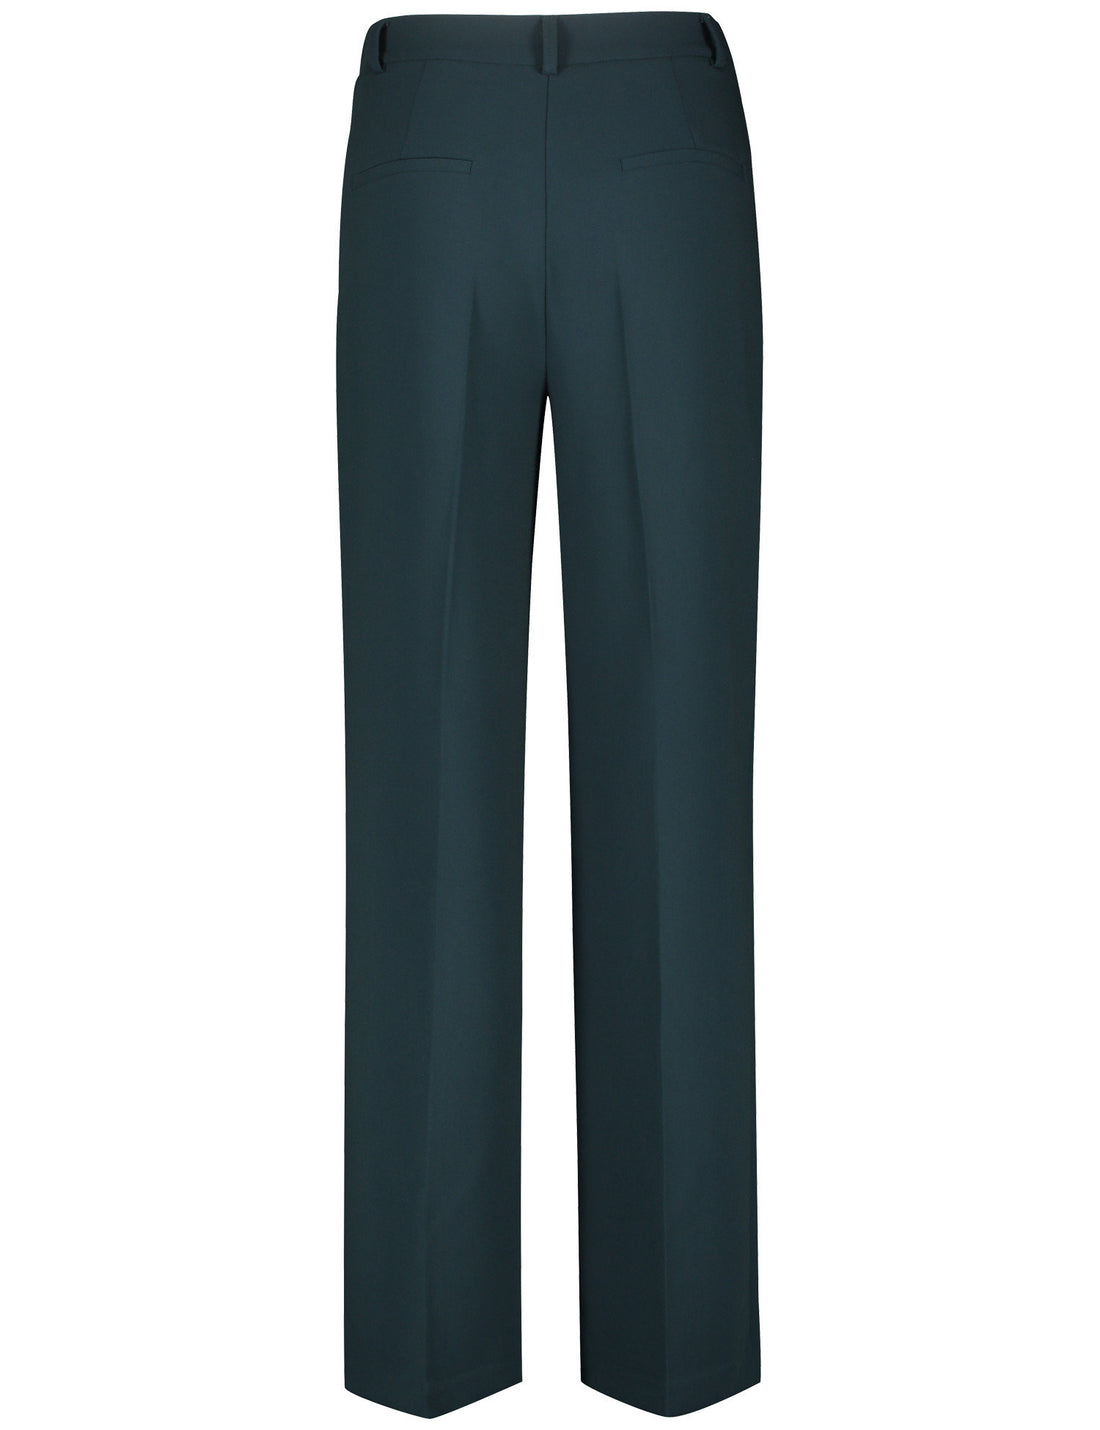 Green Dress Trousers With Center Pleat_220030-31340_50939_02